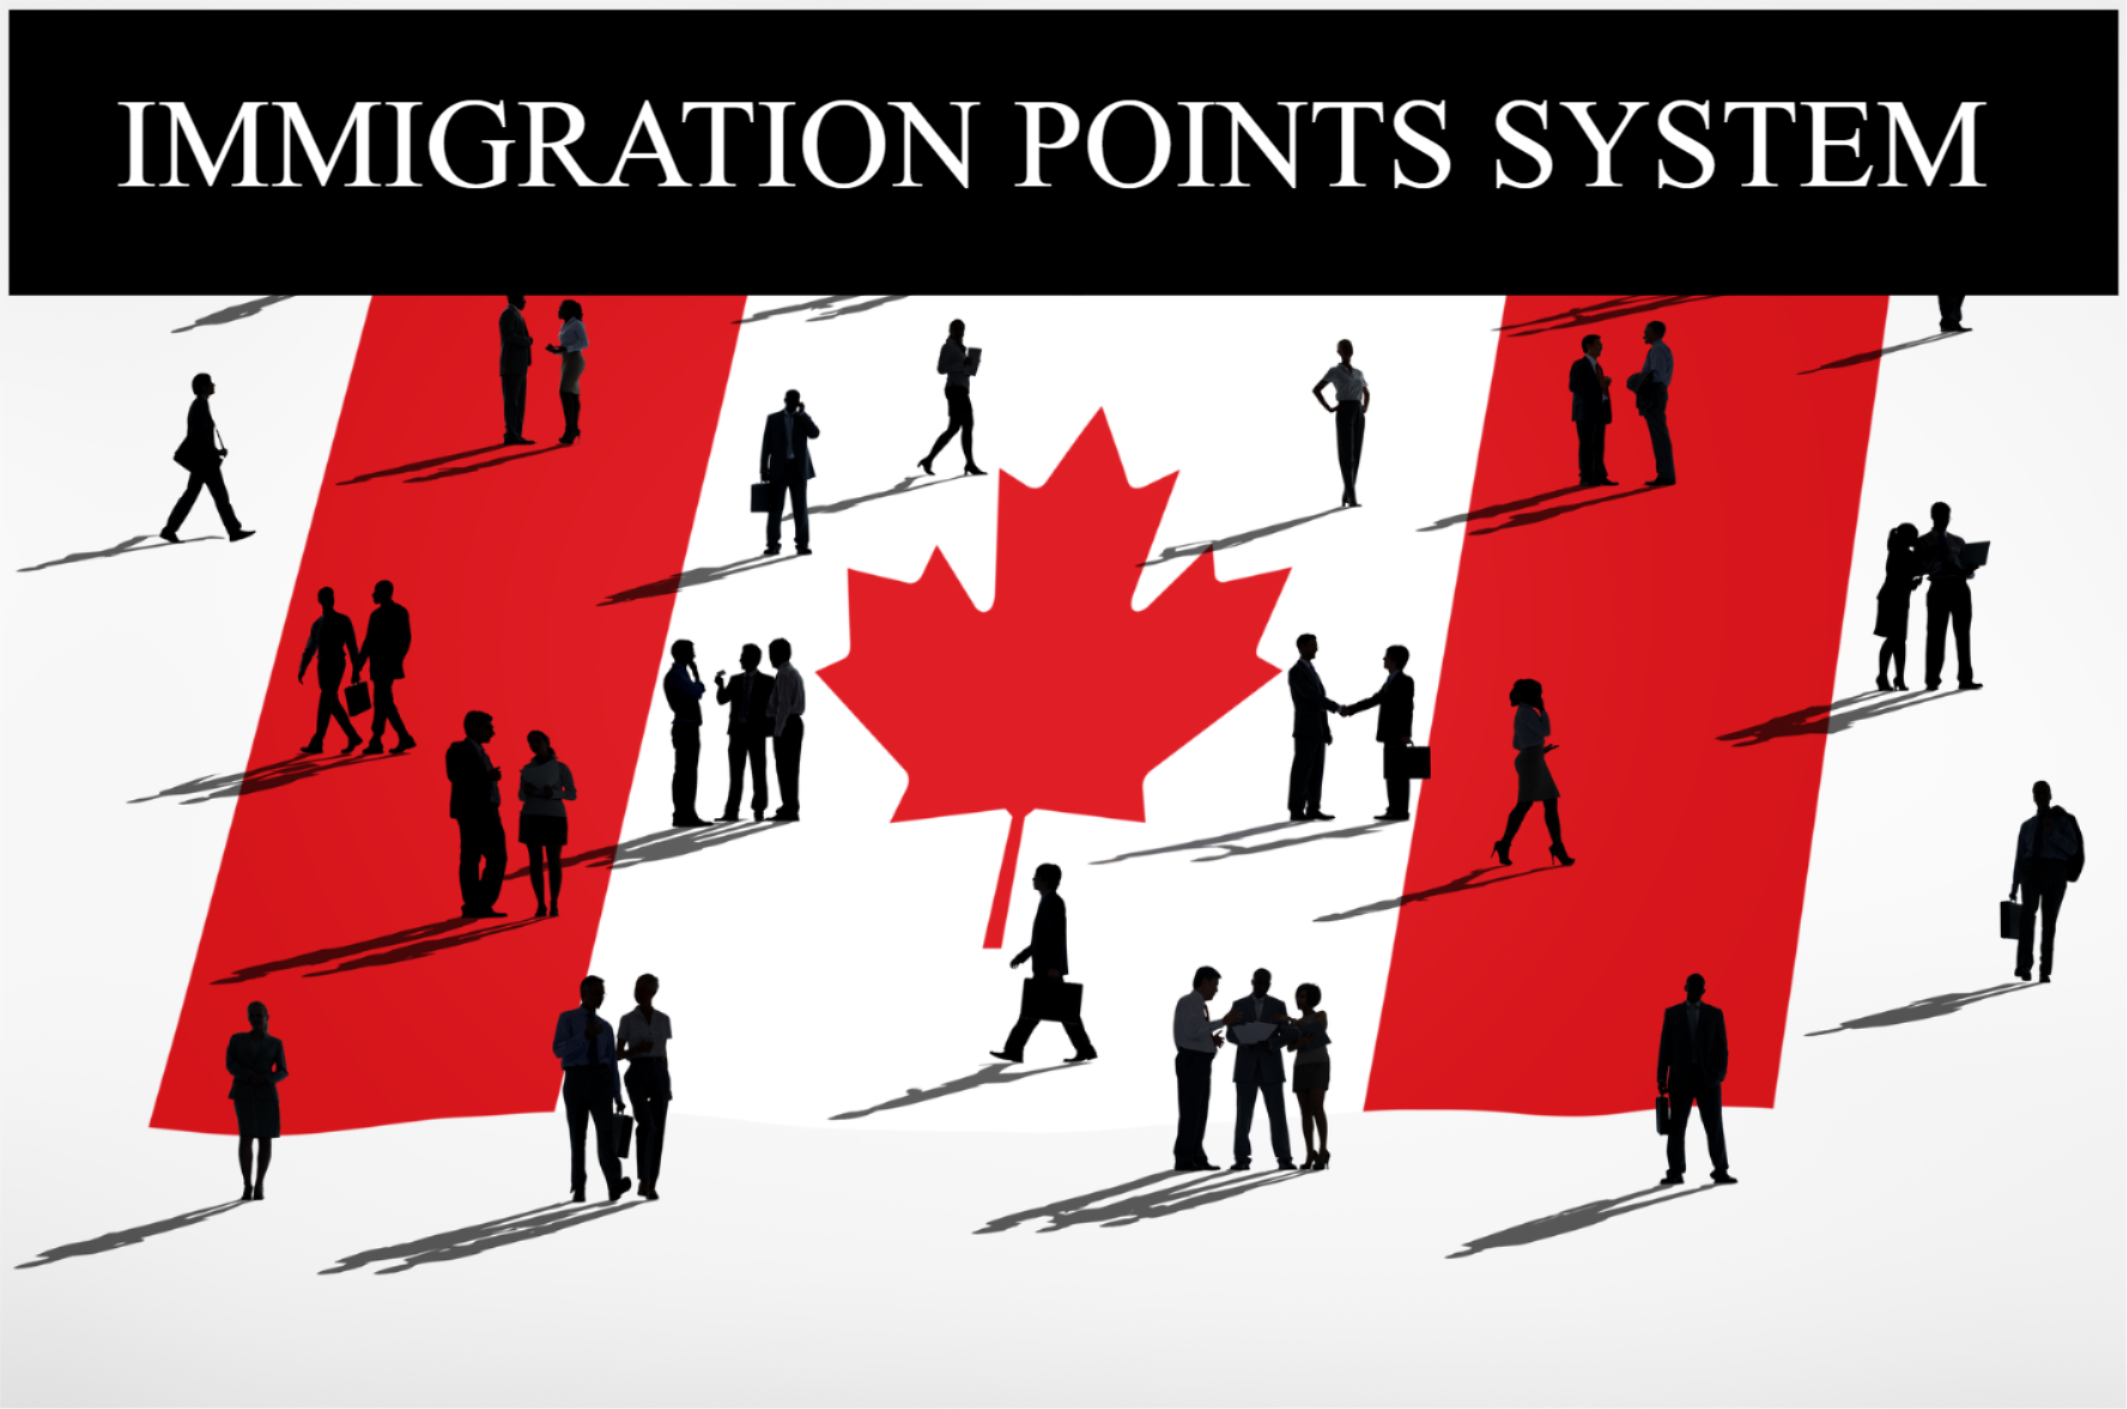 Immigration points system